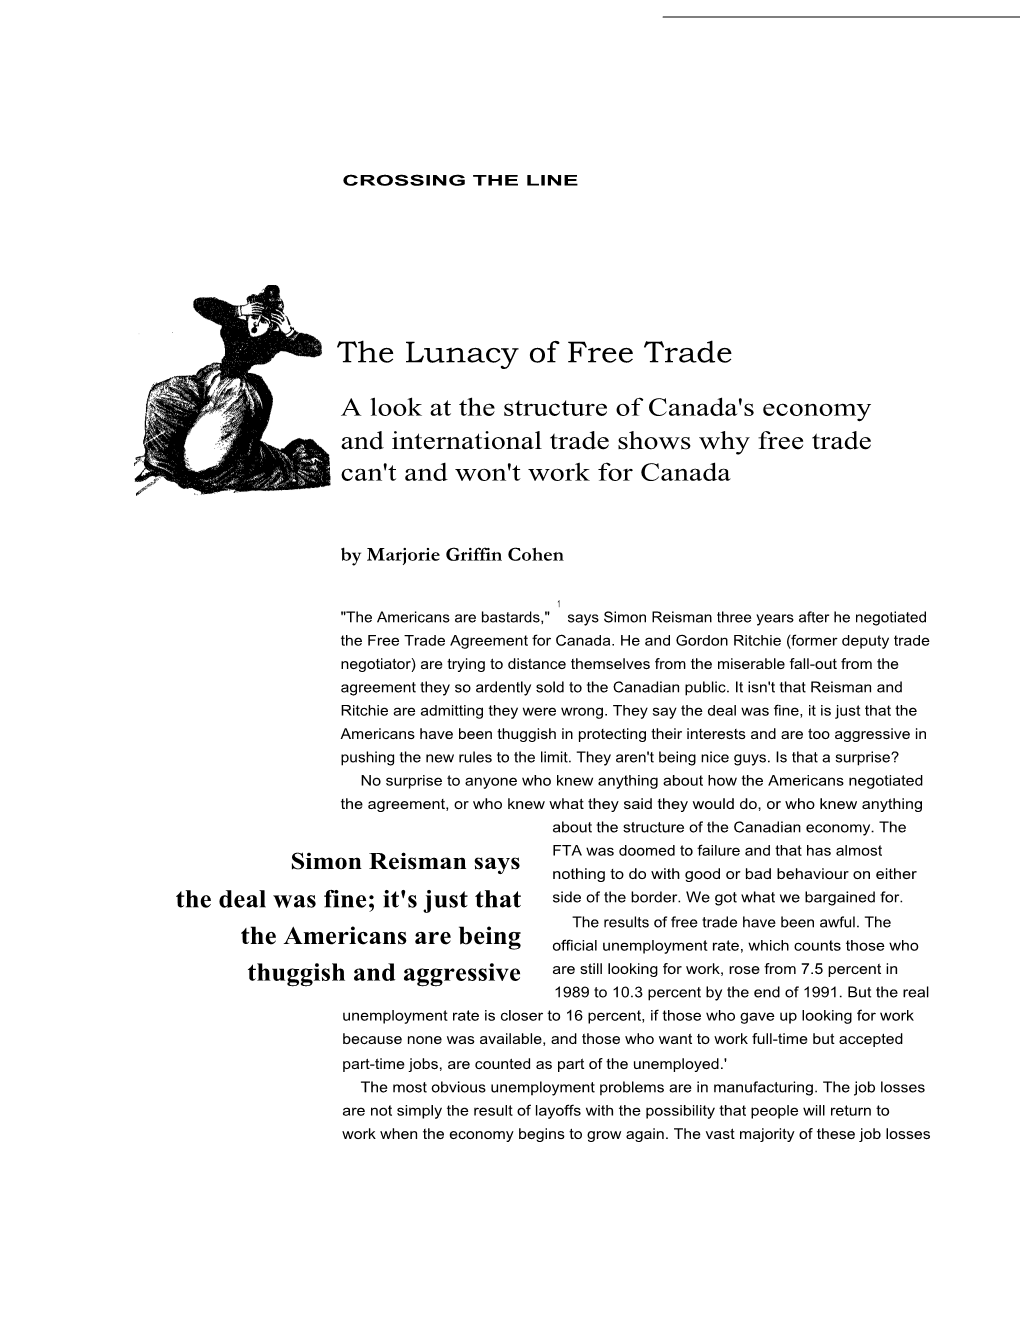 The Lunacy of Free Trade